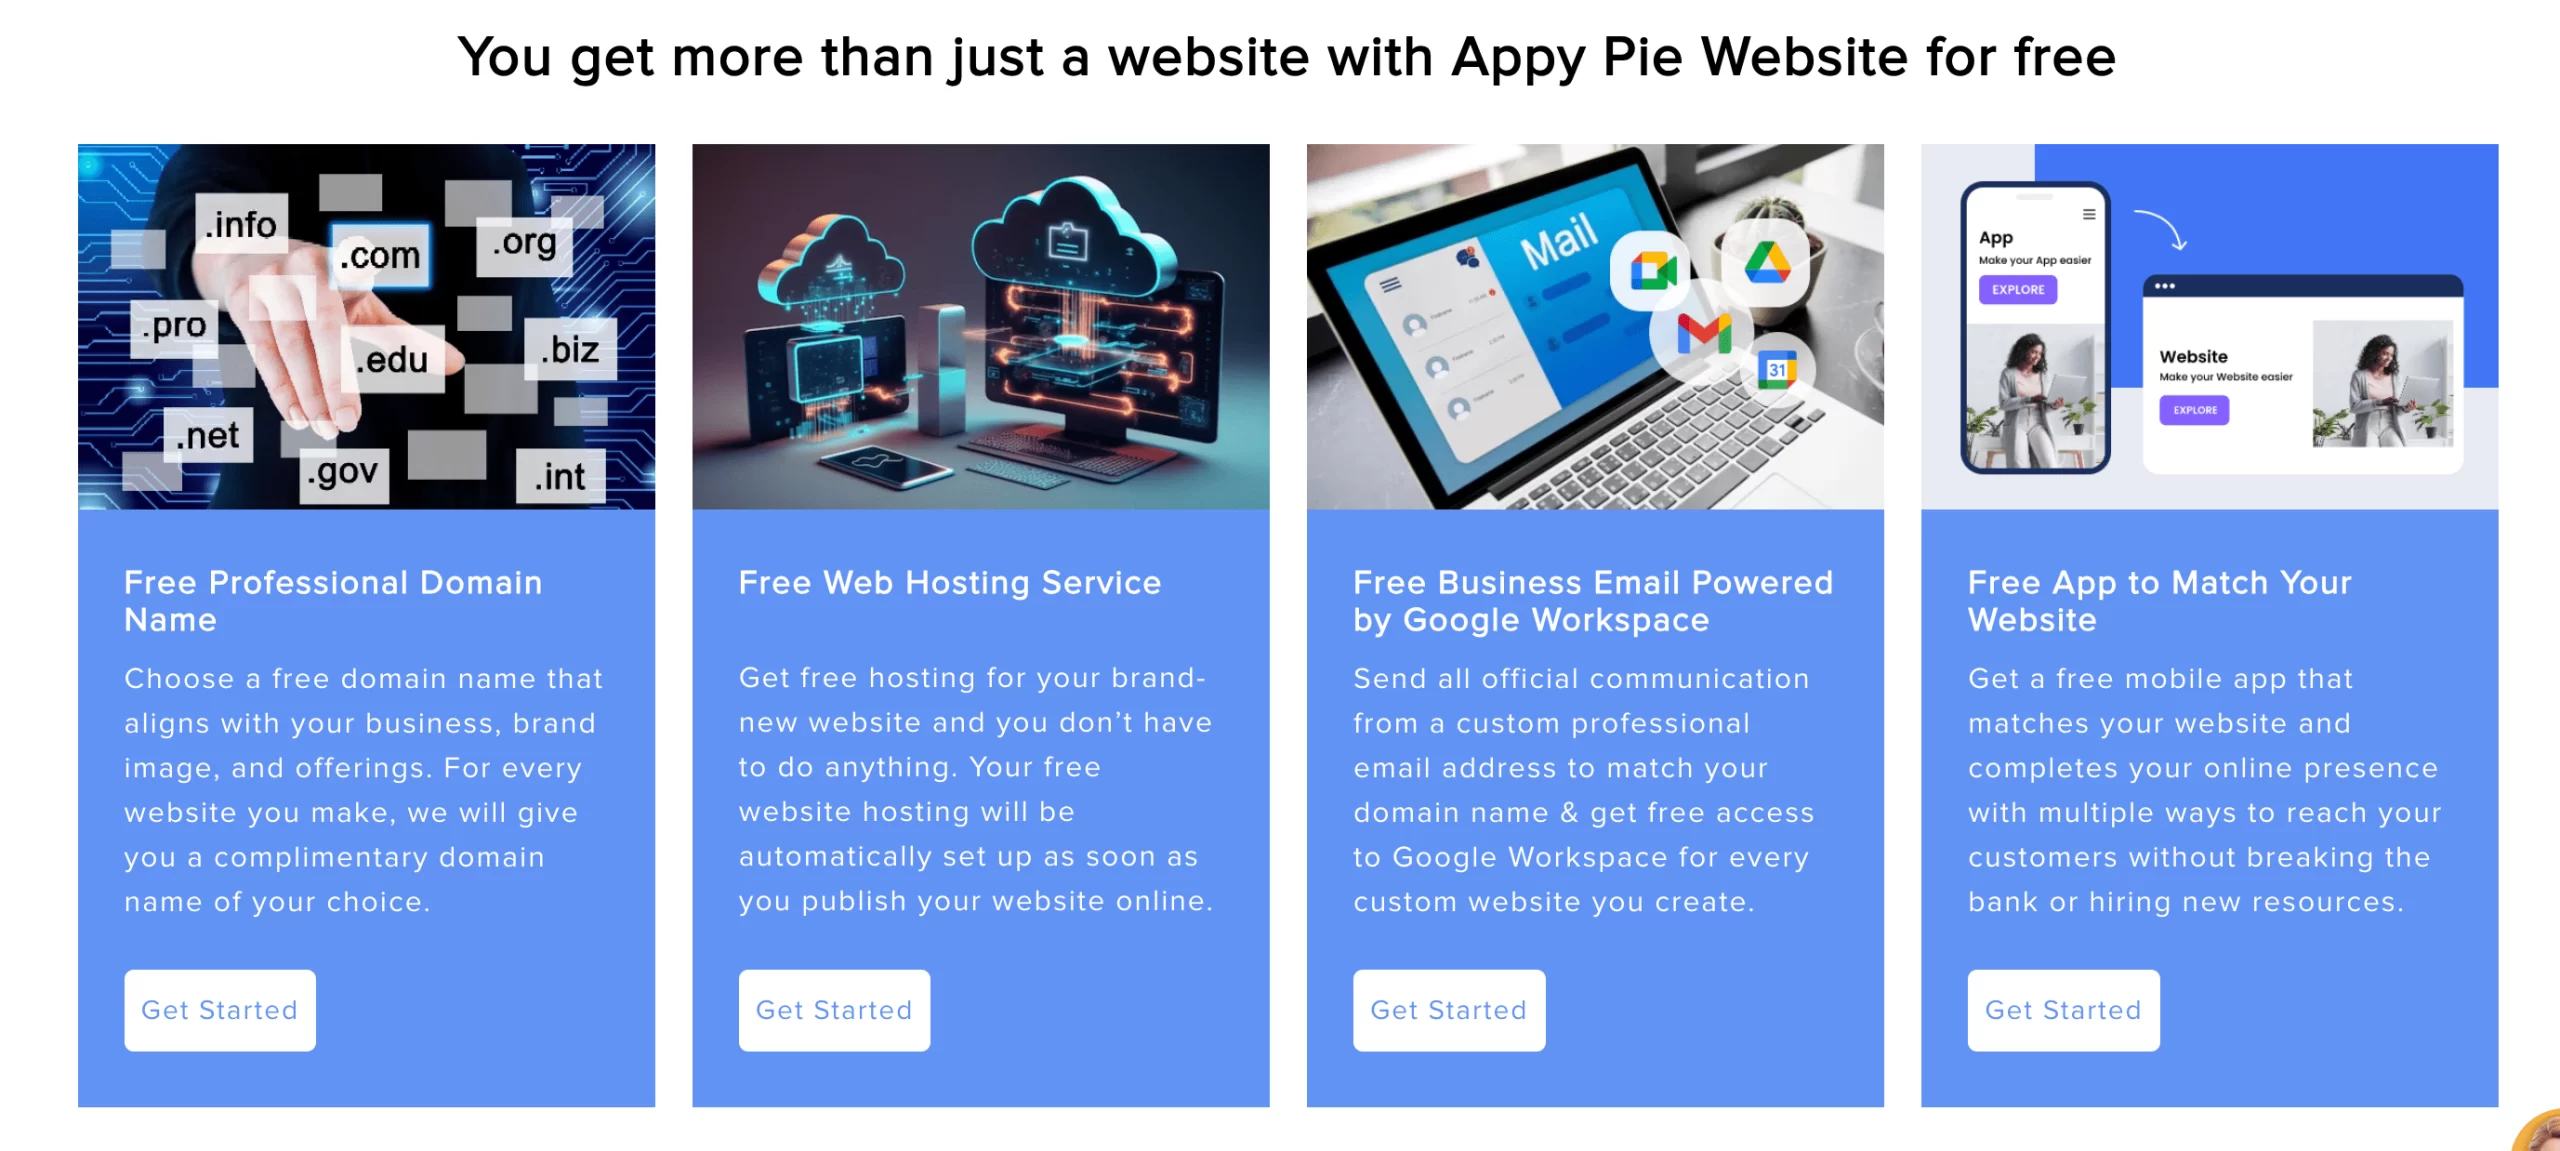 Appypie's features from their website